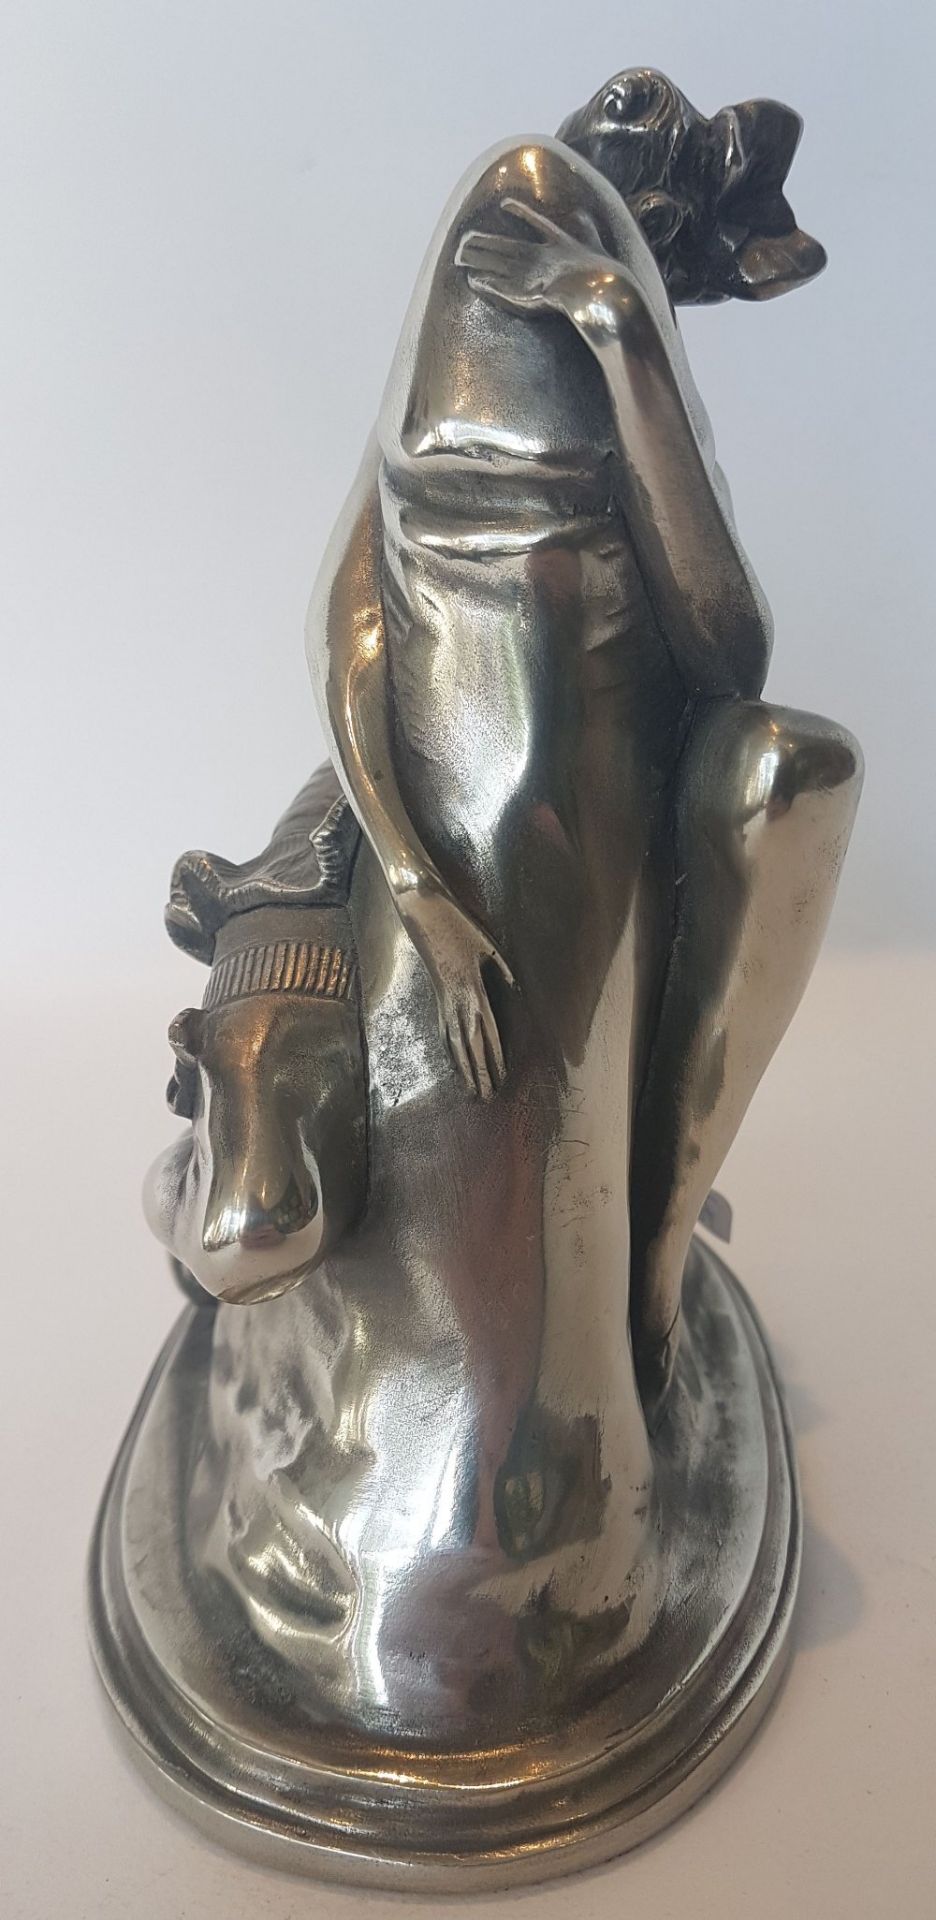 Bruno Zach (1891-1935)The embrace; Silvery metal sculpture. Signed. 16 x 13 x 8 cm - Image 3 of 5